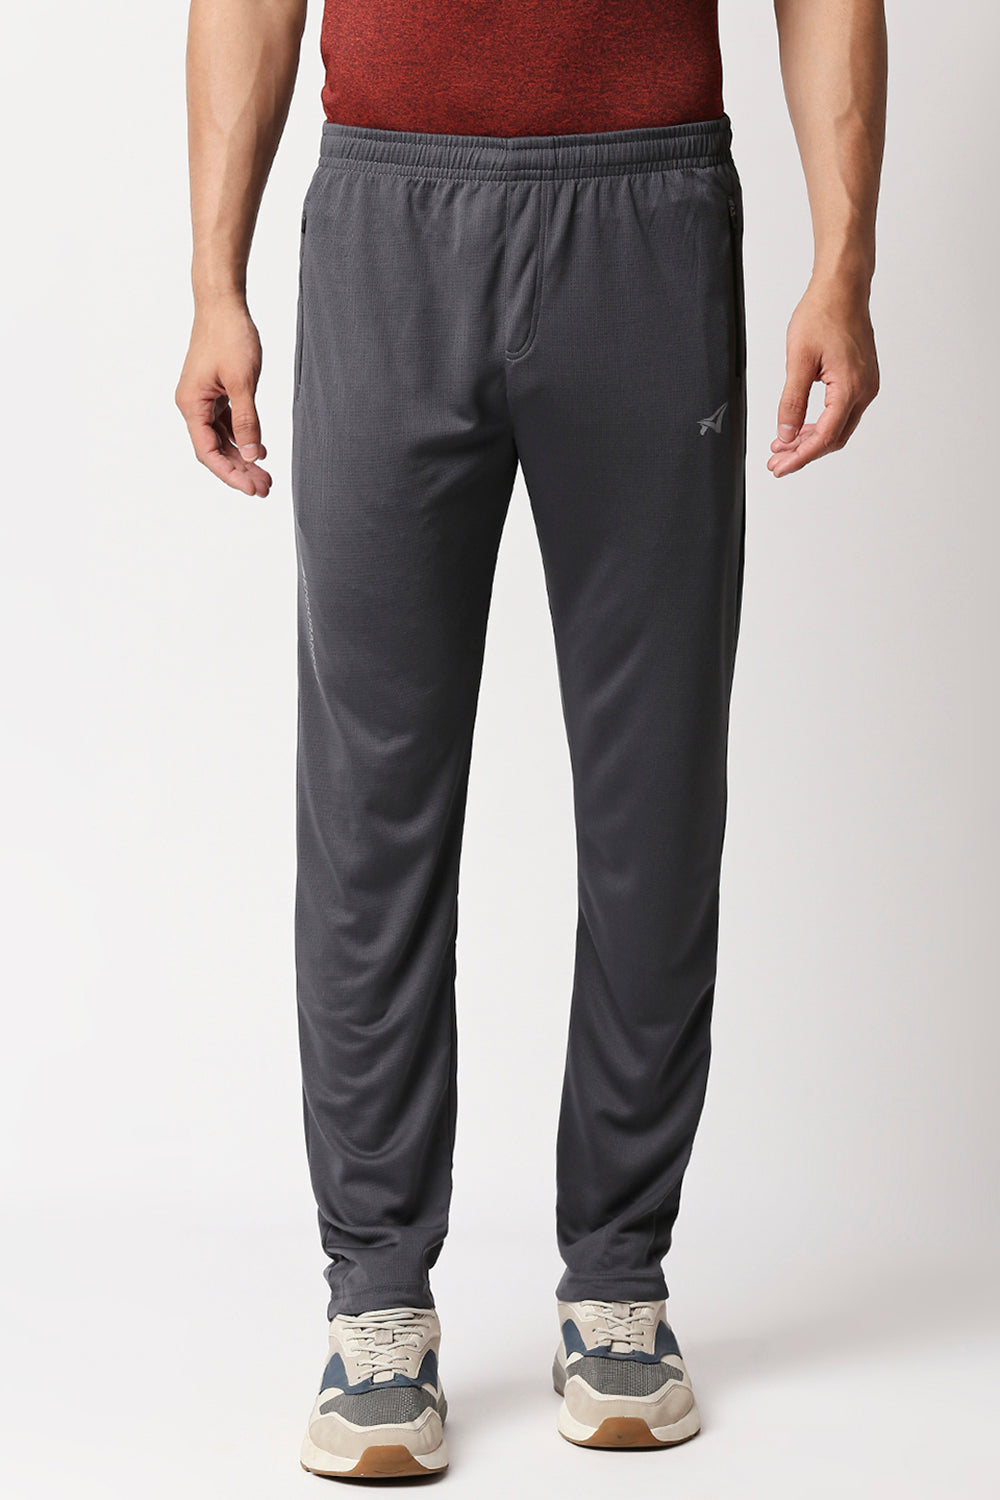 Ultra Performance Mens Athletic Joggers